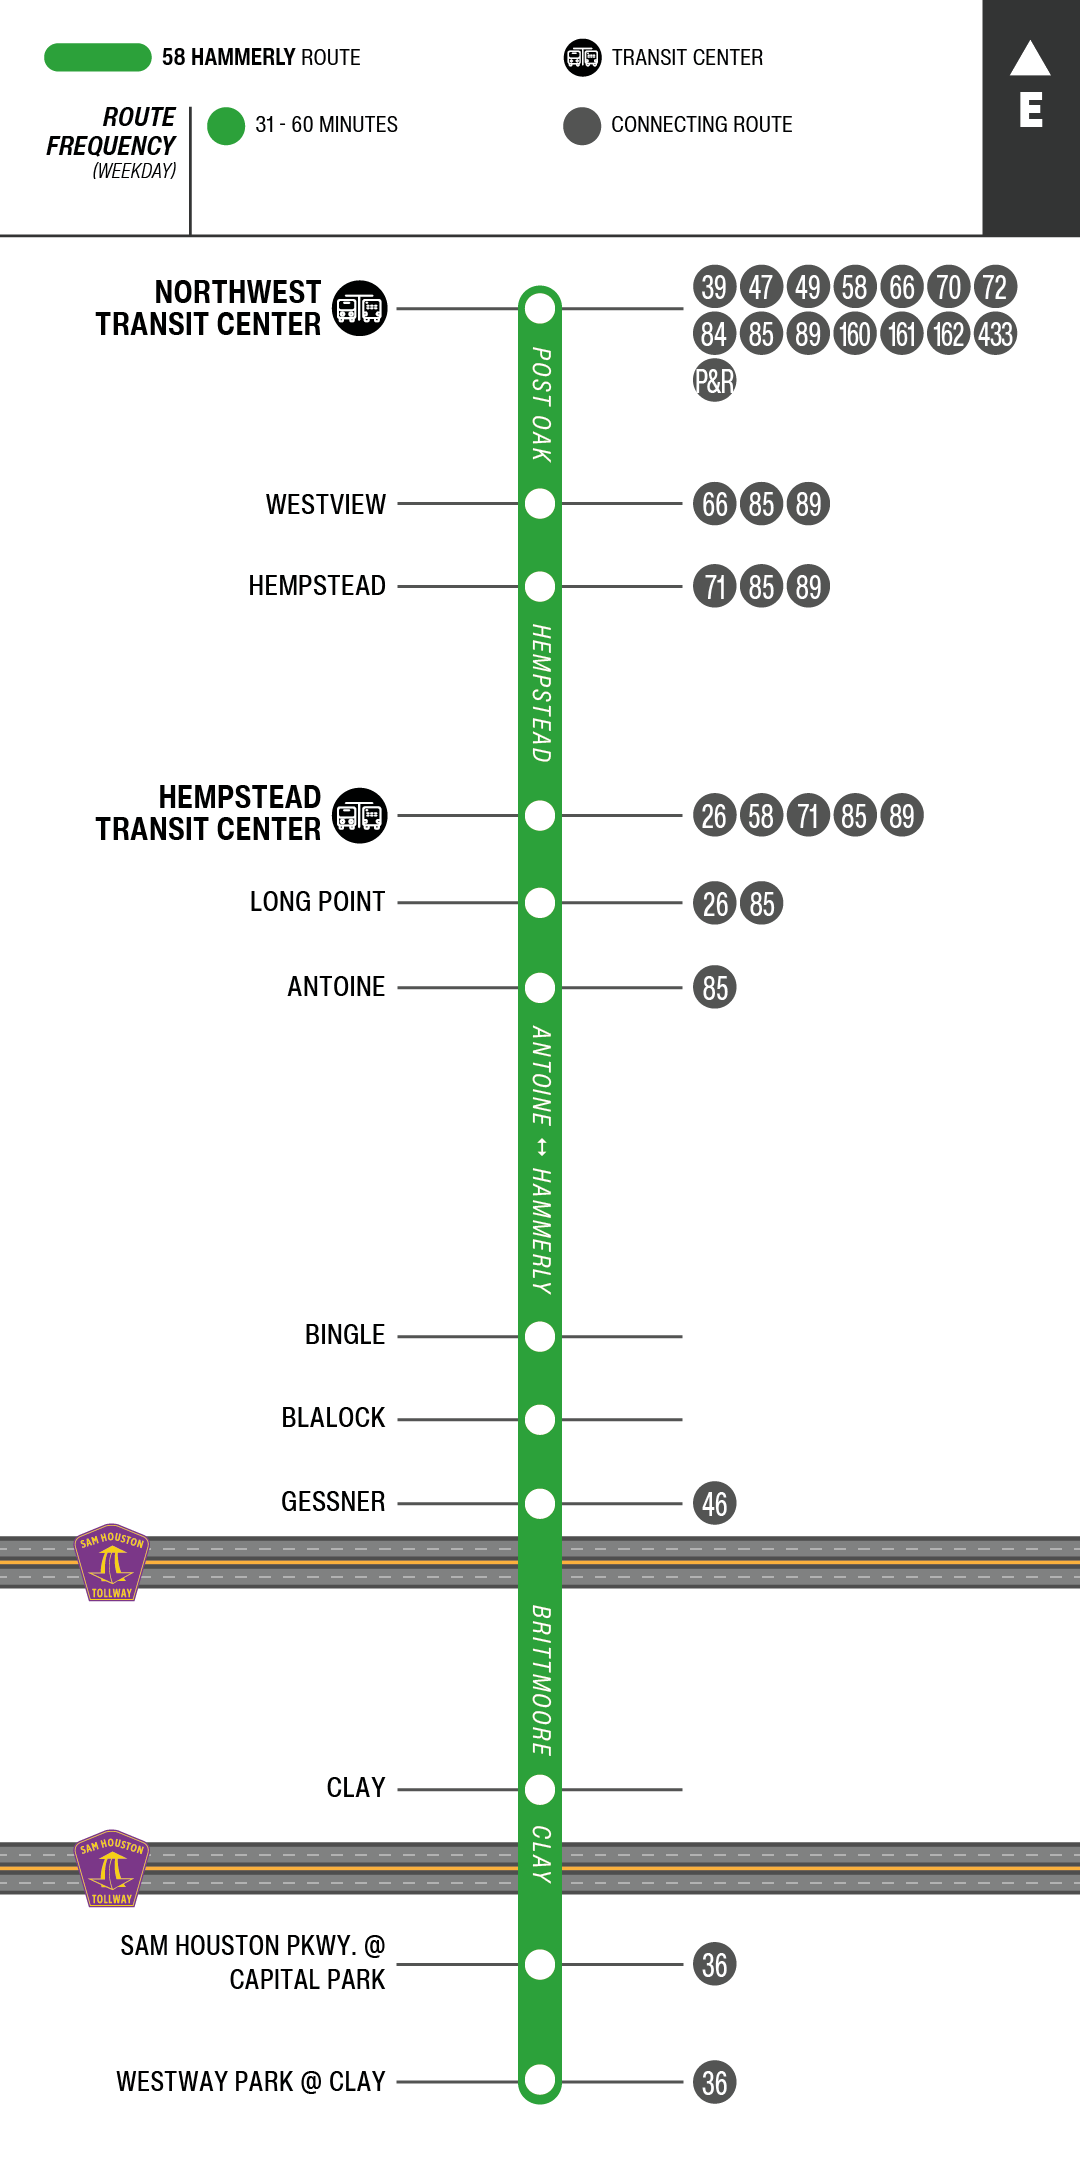 Route map for 58 Hammerly bus